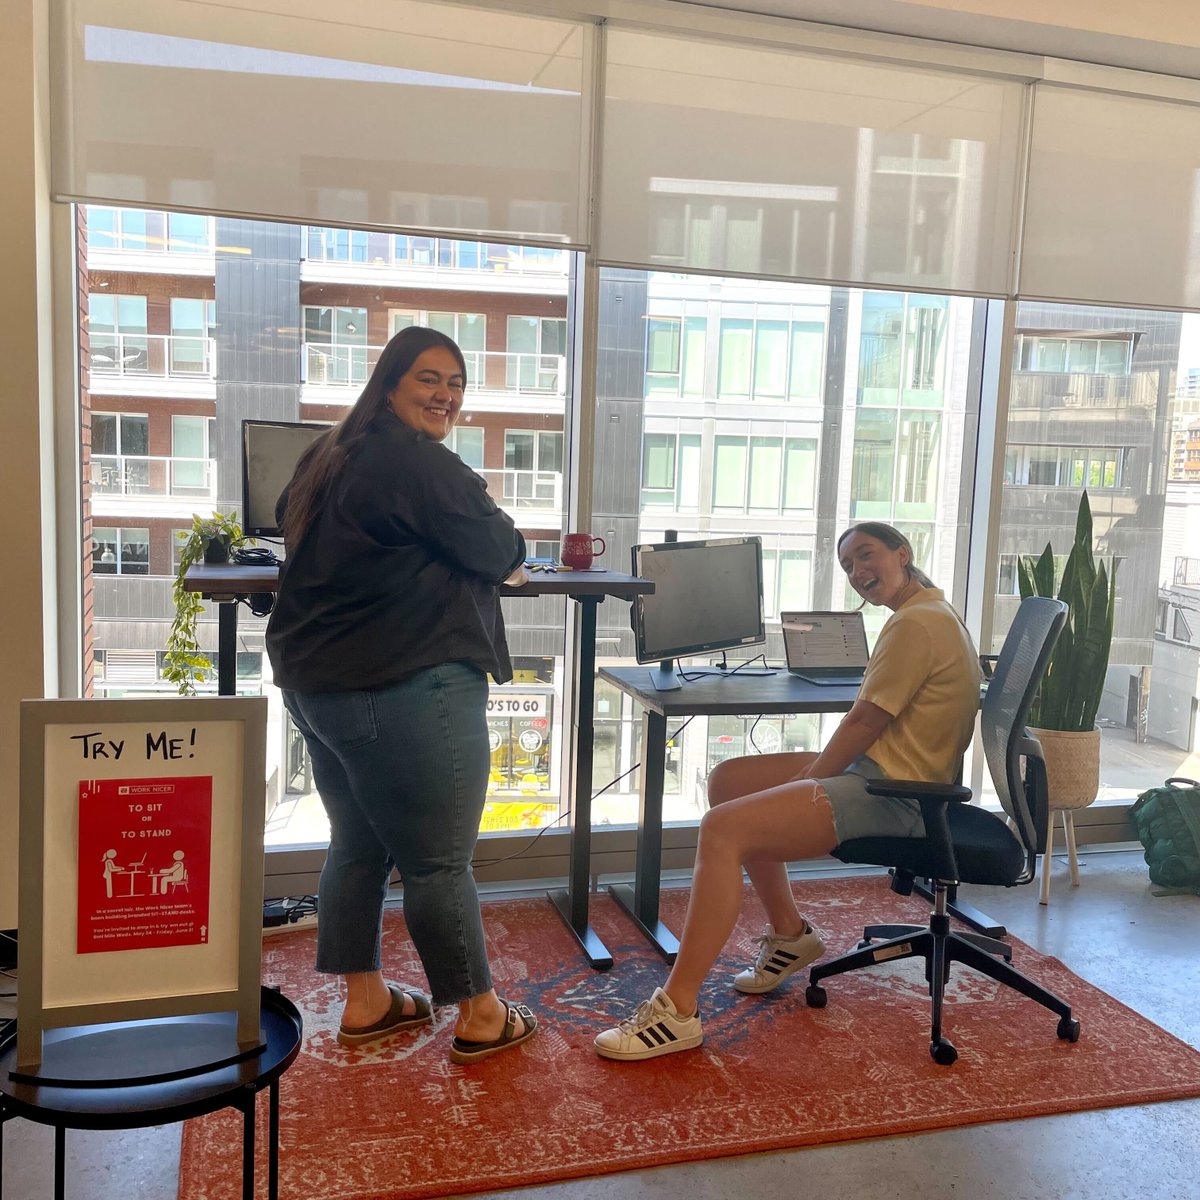 To stand or to sit...the eternal debate! 🤔

📍 In a secret lair, the Work Nicer team's been building desks. WHATCHA THINK?! Hop on over to Red Mile to try 'em out!
.
.
#NiceDesks #Coworking #SitStandDesks #Community #YYC #Calgary #YEG #Edmonton